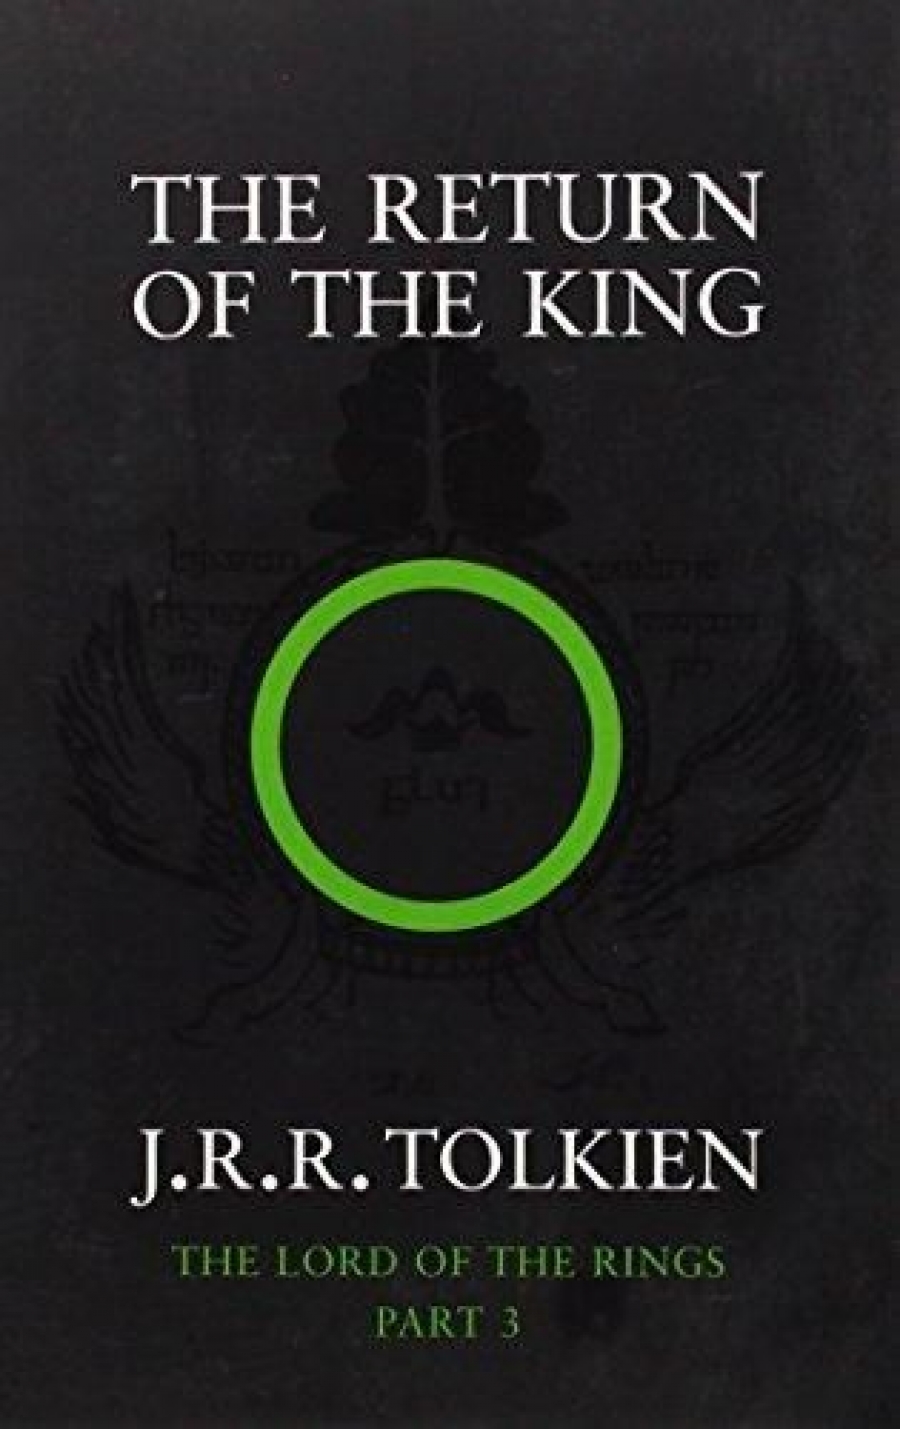 Tolkien J.R.R. The Return of the King 